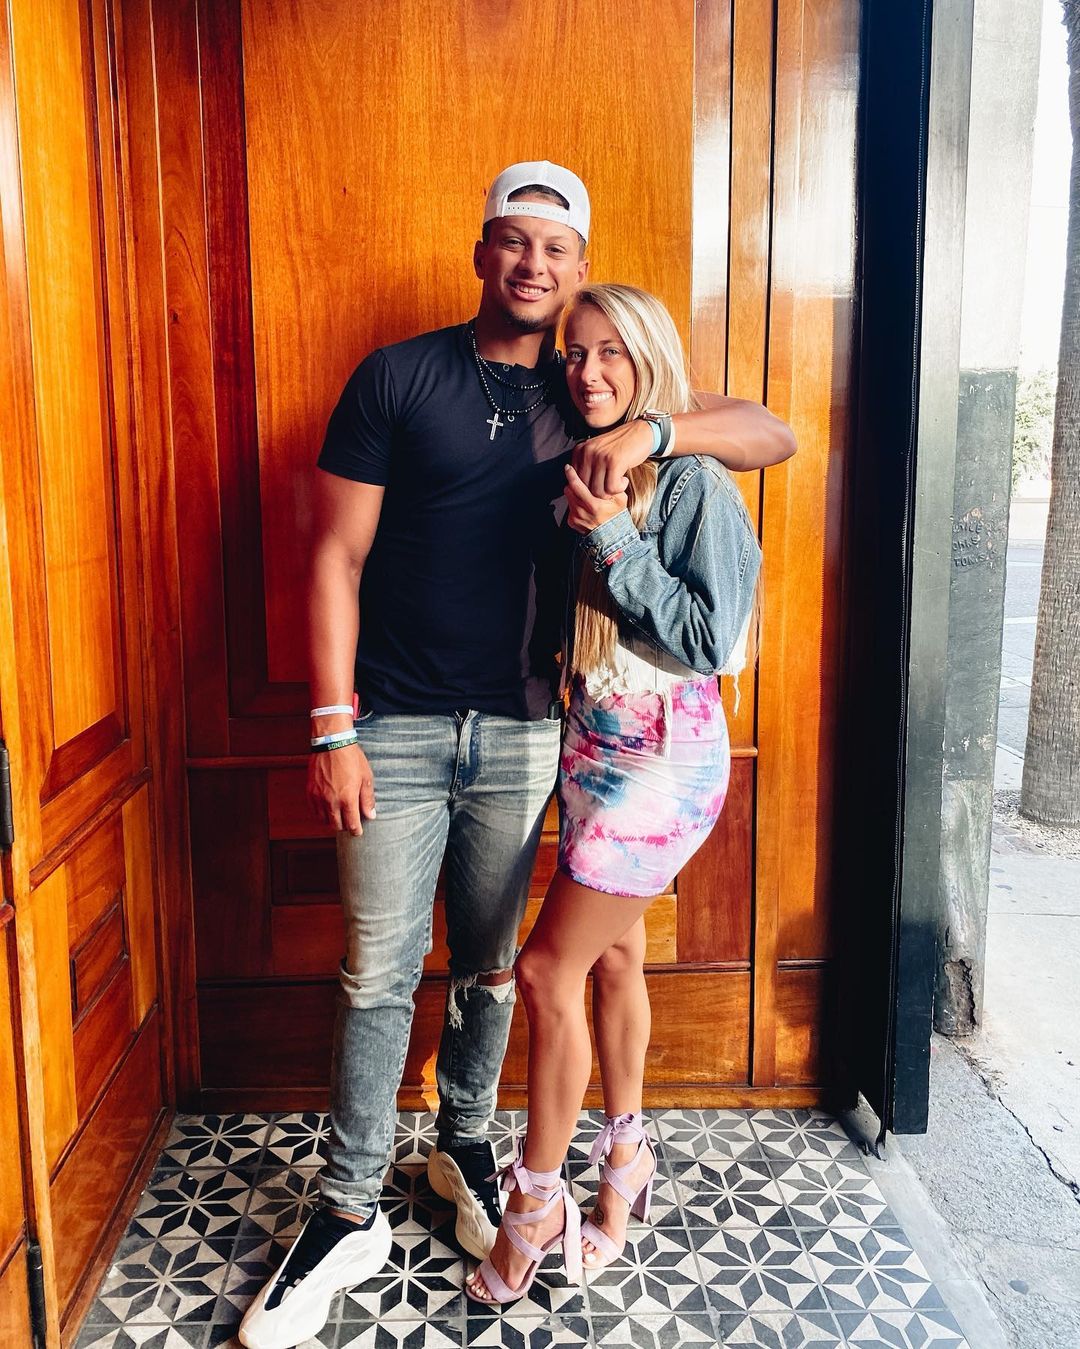 When is Patrick Mahomes getting married to Brittany Matthews